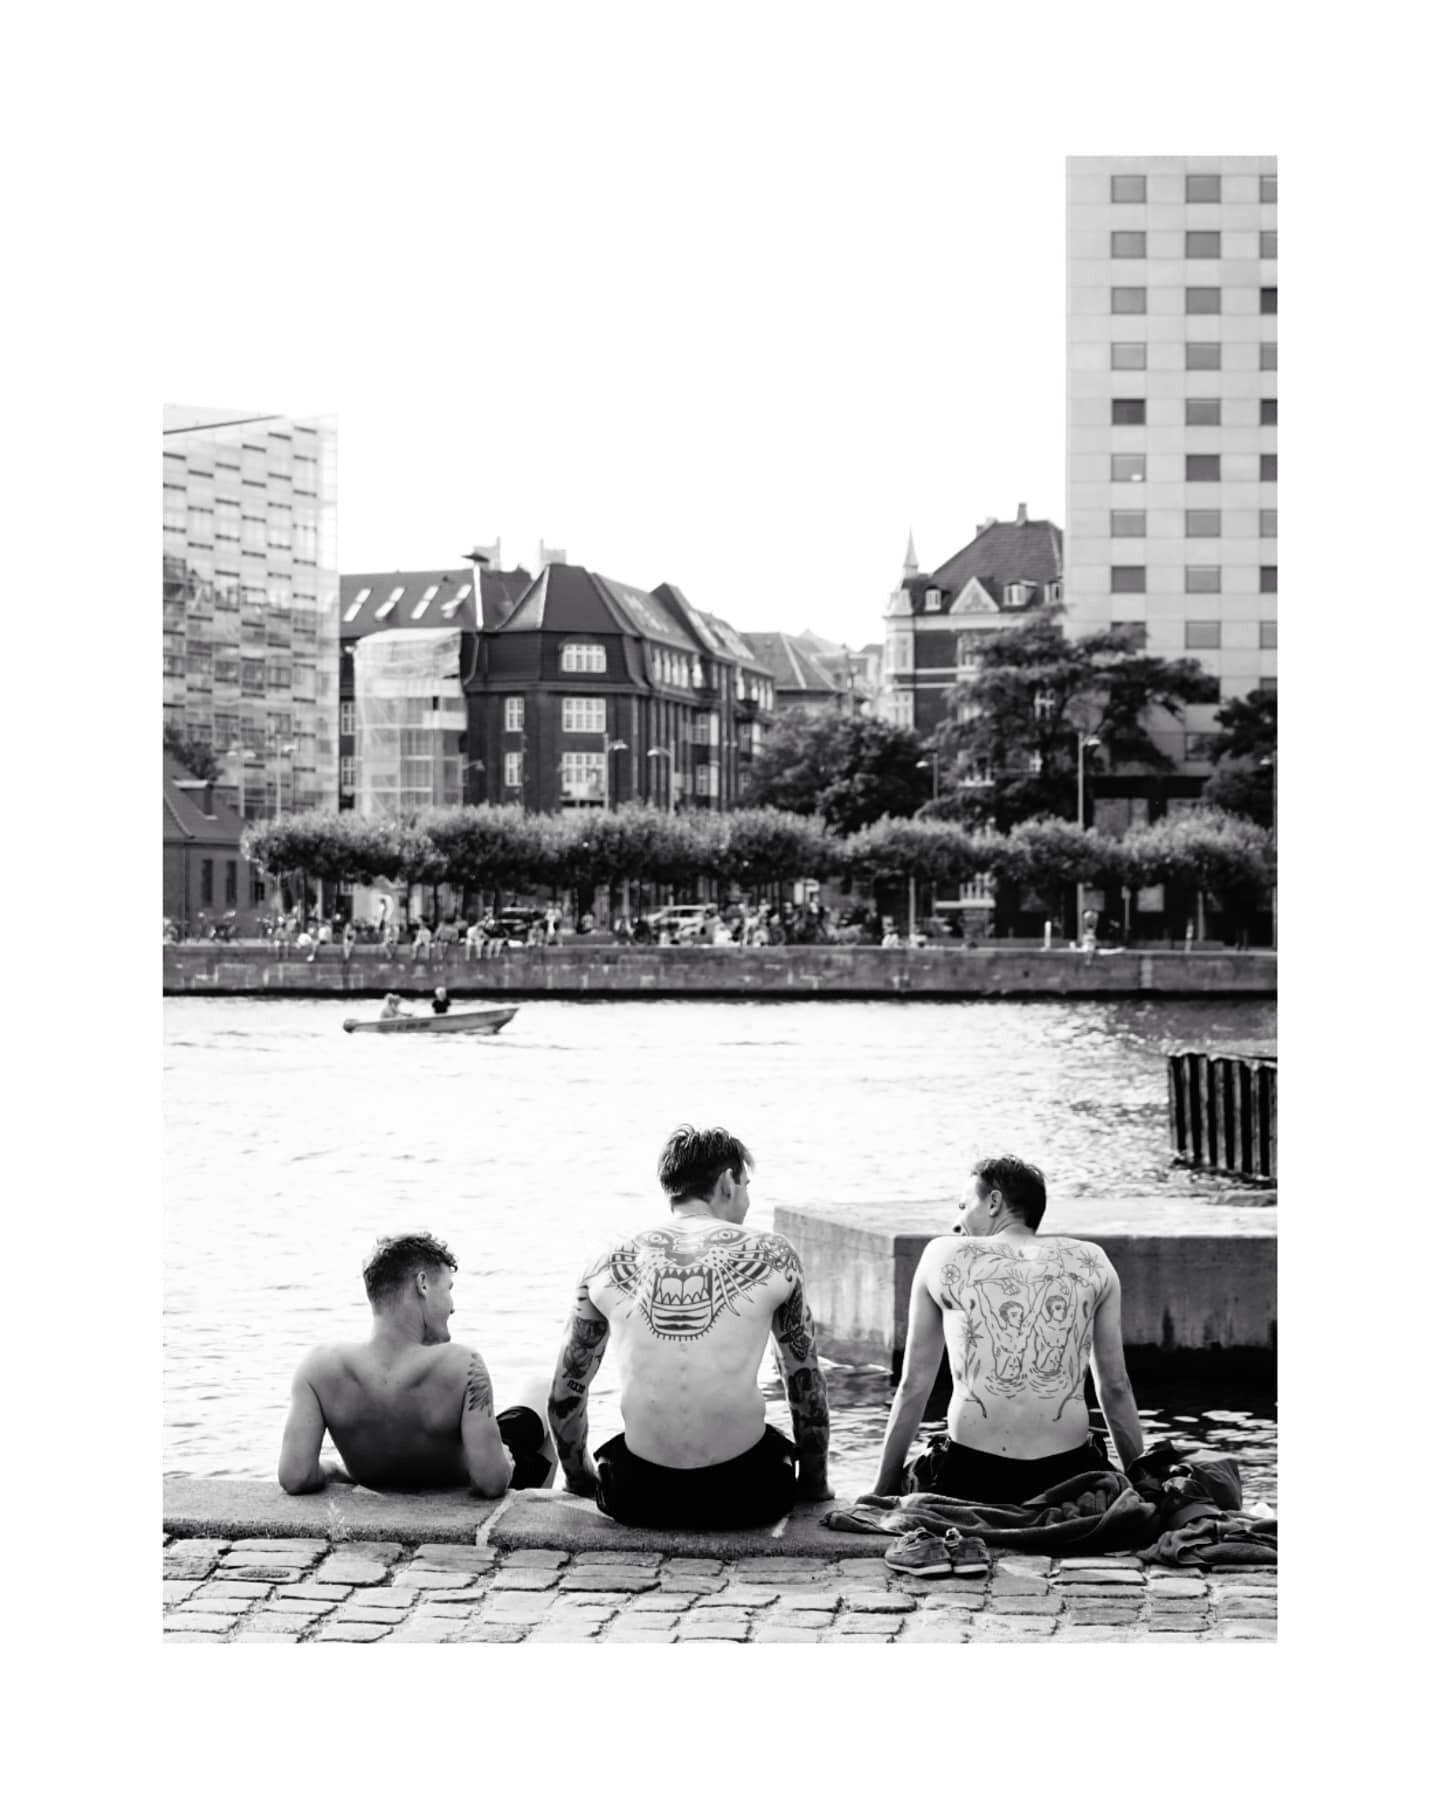 &hellip;and the livin is easy

Summertime in Copenhagen where thousands of people gather along the harbour, making the most of their sunny days to go for a swim, socialize and sunbathe

2020/07

#k&oslash;benhavn #denmark